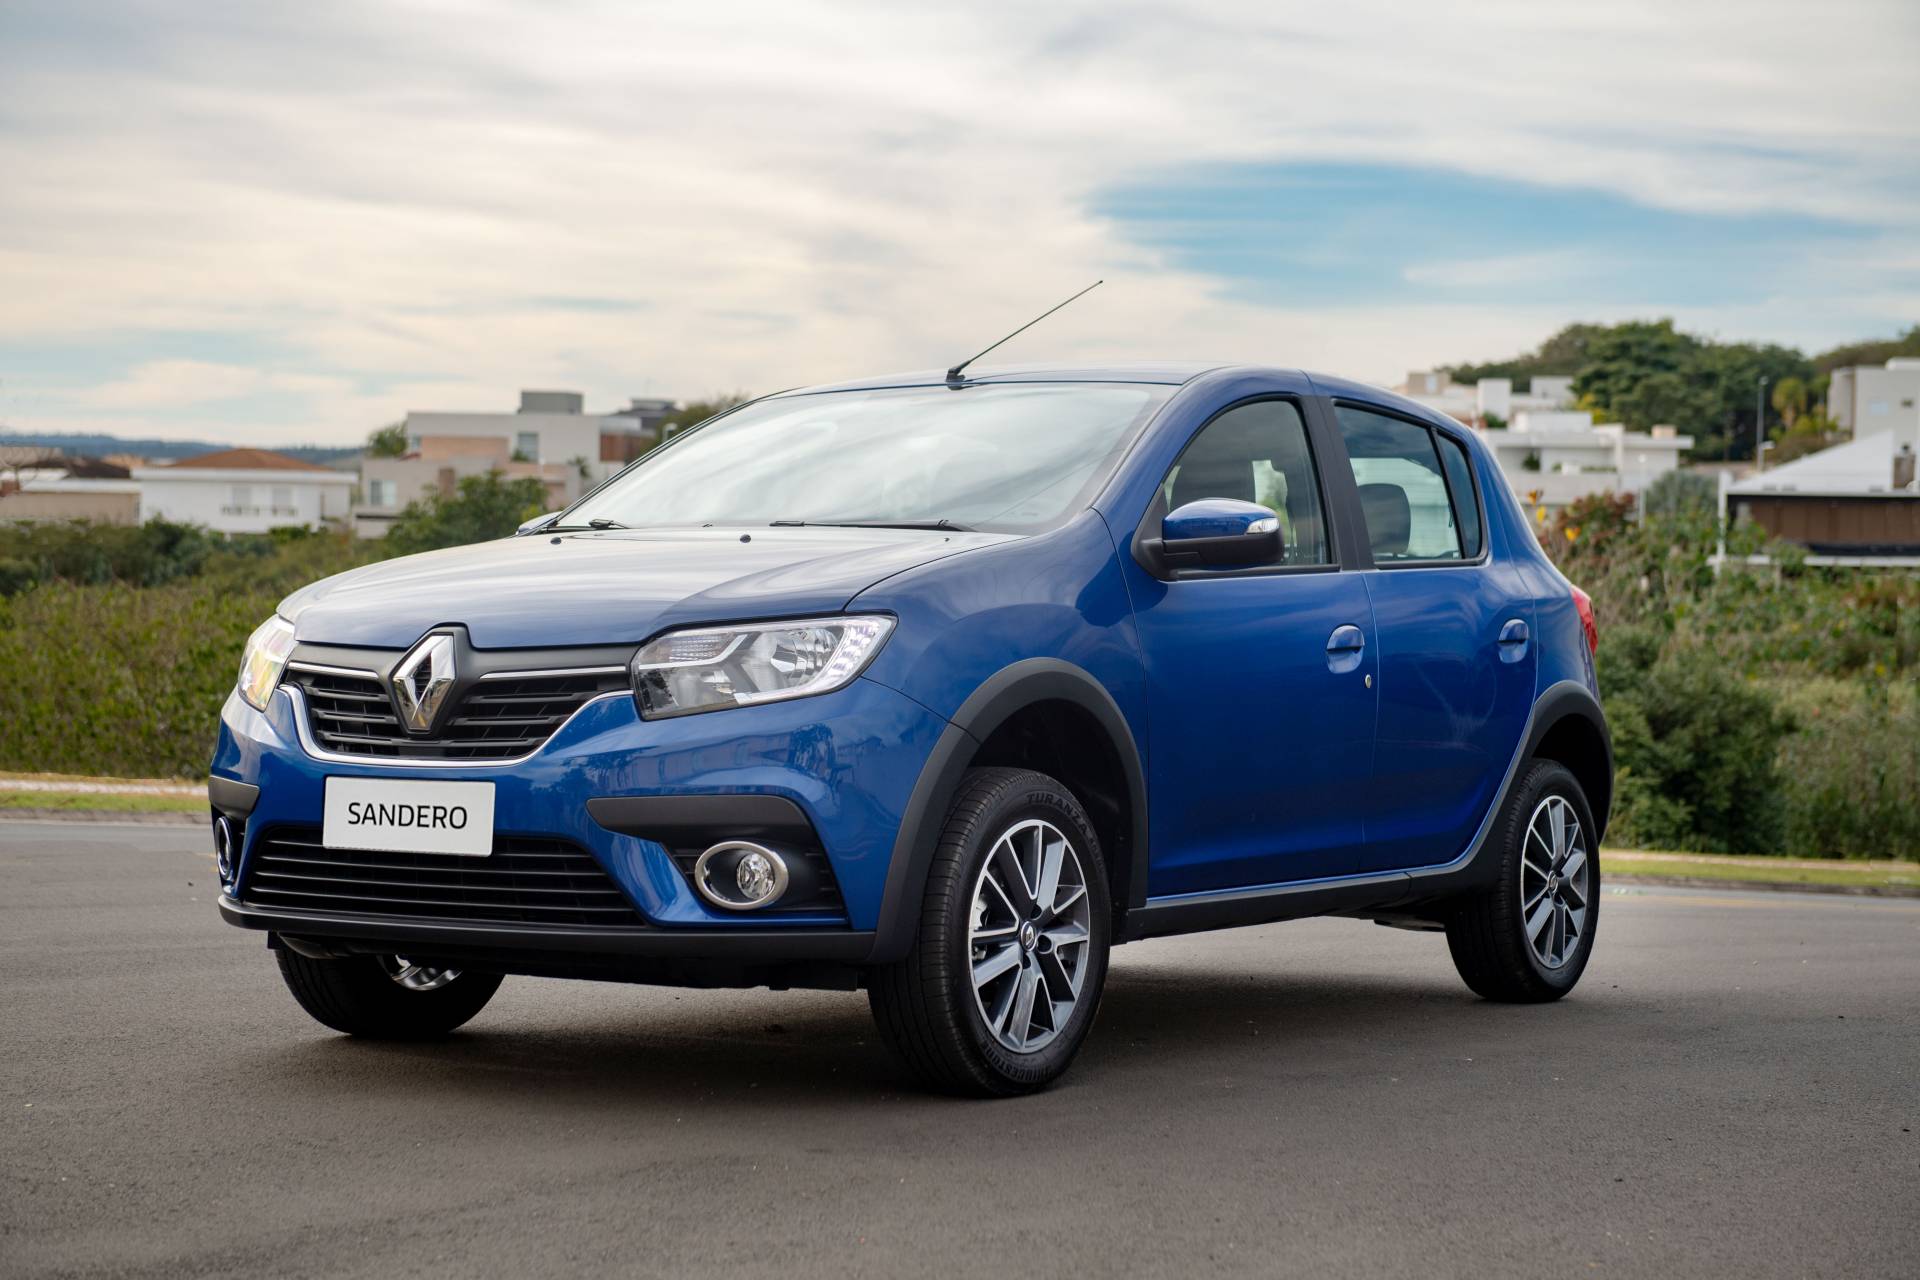 2020 Renault Logan, Sandero And Stepway Unveiled In Brazil With New ...